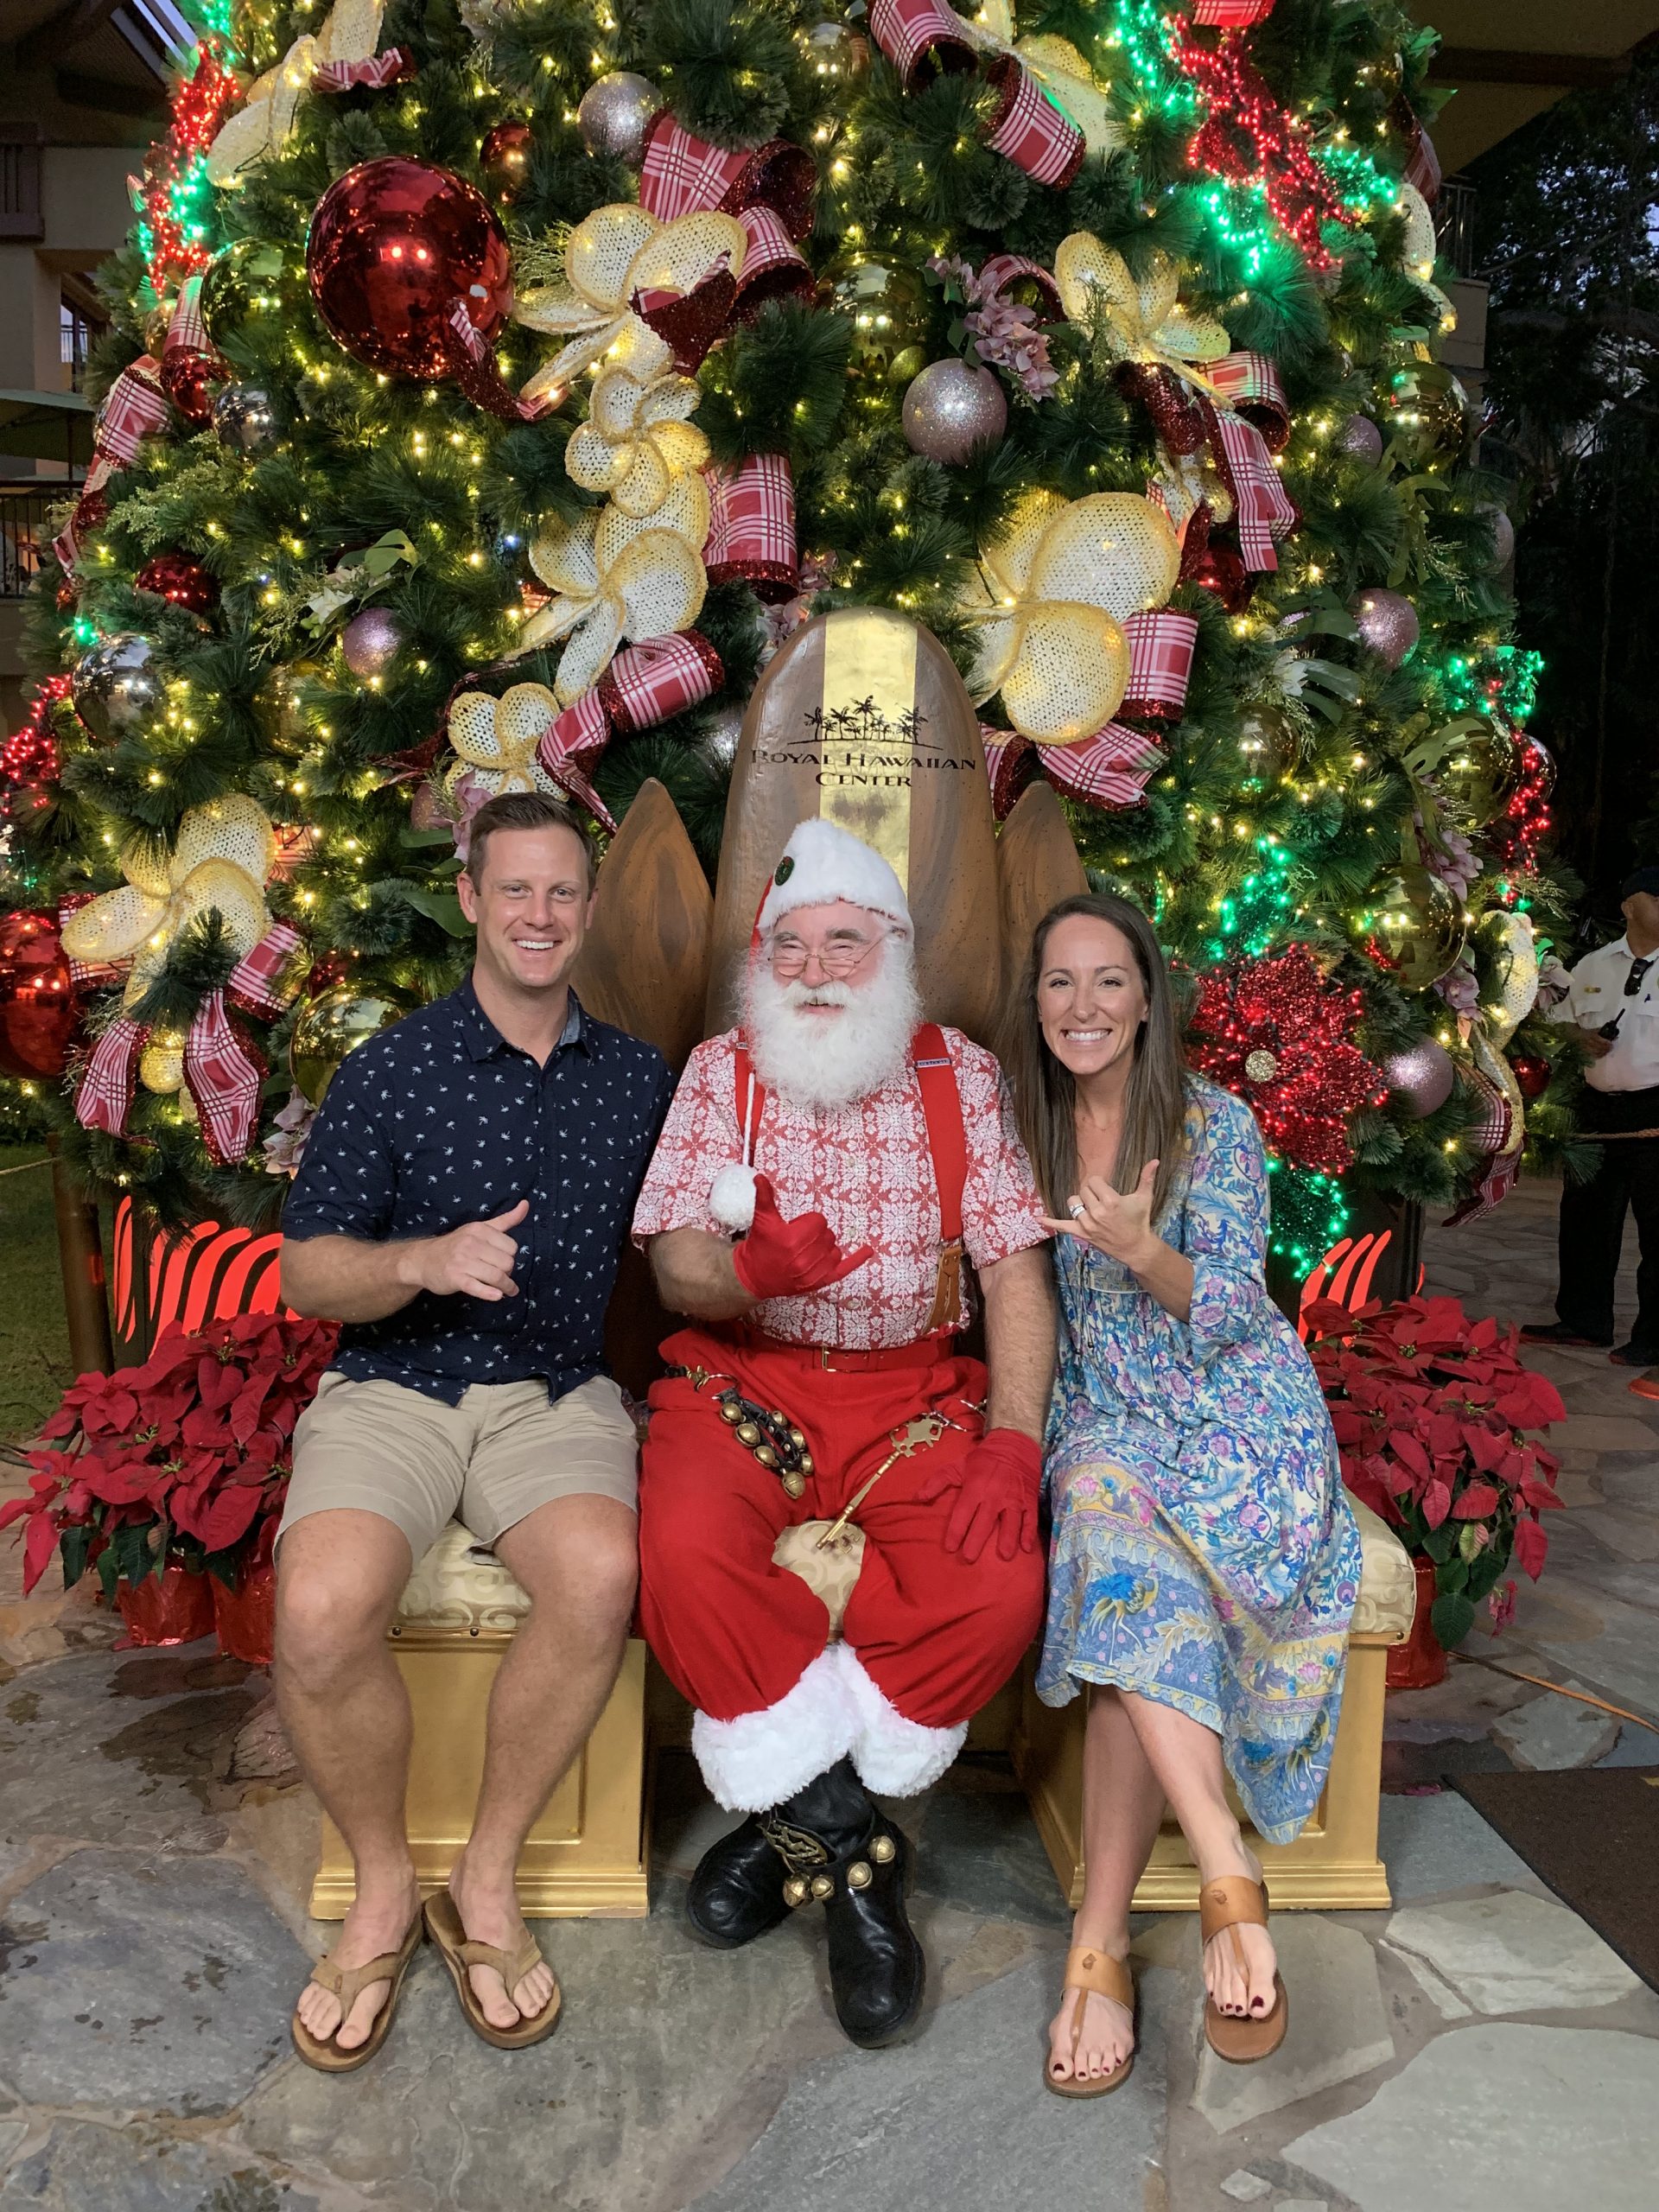 Holiday Events At Royal Hawaiian Center - Get in the holiday spirit with festive events for the whole family at Honolulu's Royal Hawaiian Center! | Royal Hawaiian Shopping Center - Christmas In Honolulu - Christmas Events Hawaii - Oahu Christmas Events #oahu #hawaii #royalhawaiiancenter